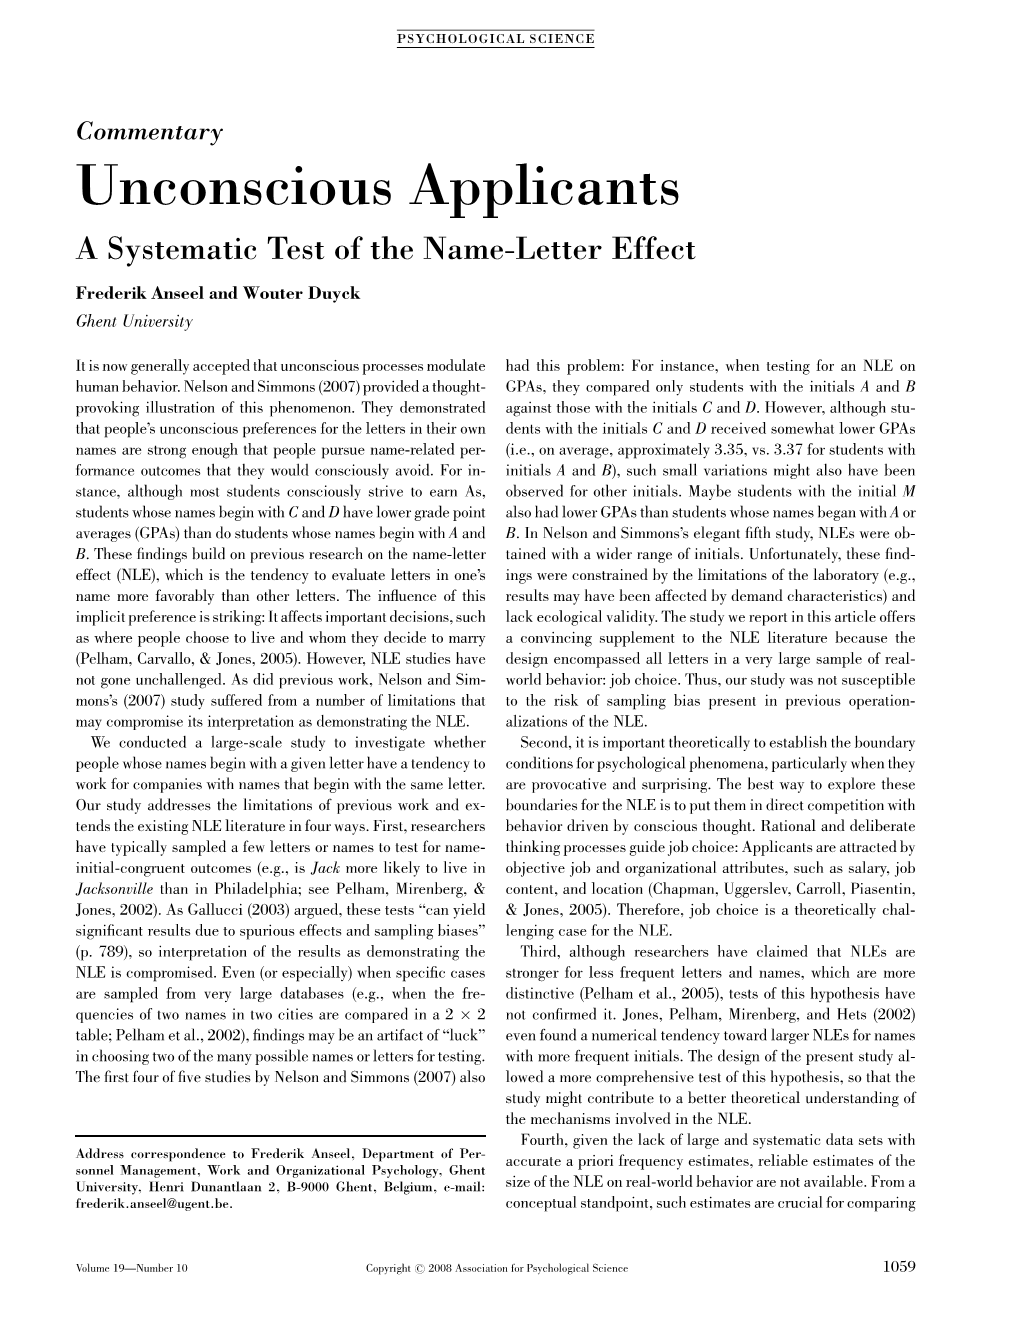 Unconscious Applicants: a Systematic Test of the Name-Letter Effect